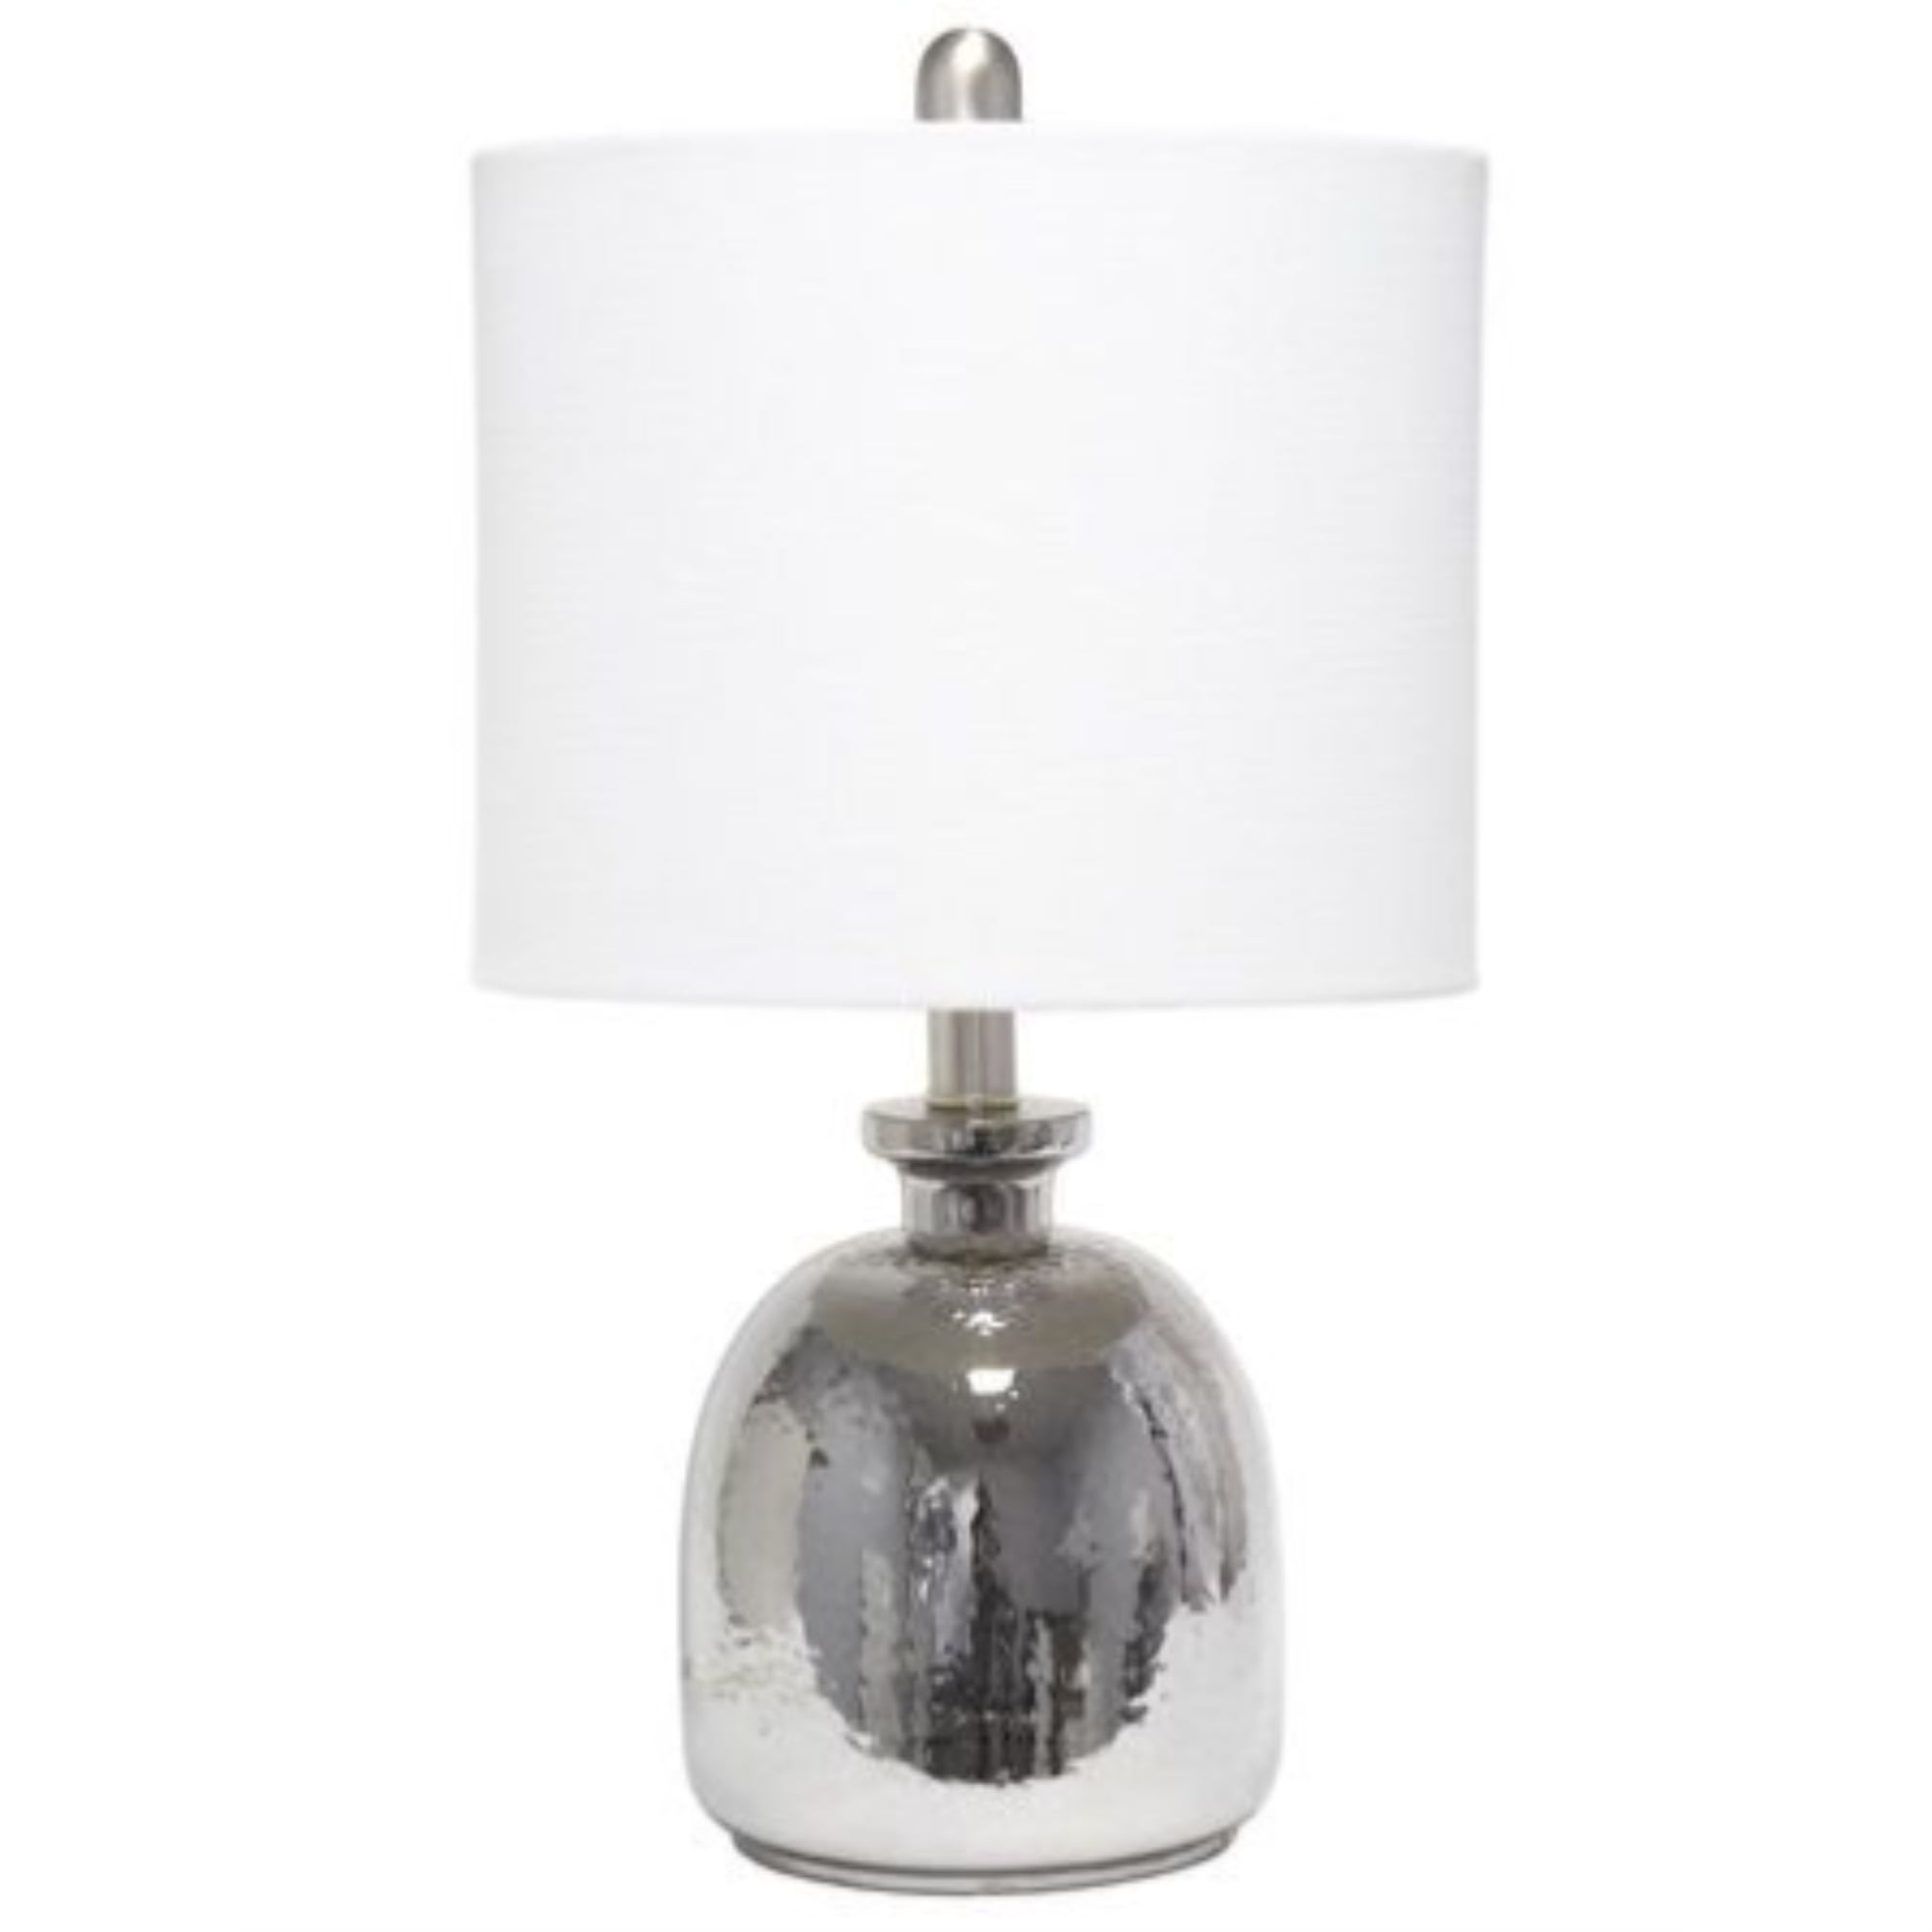 Lalia Home Metallic Gray Hammered Glass Jar Table Lamp with White Linen Shade